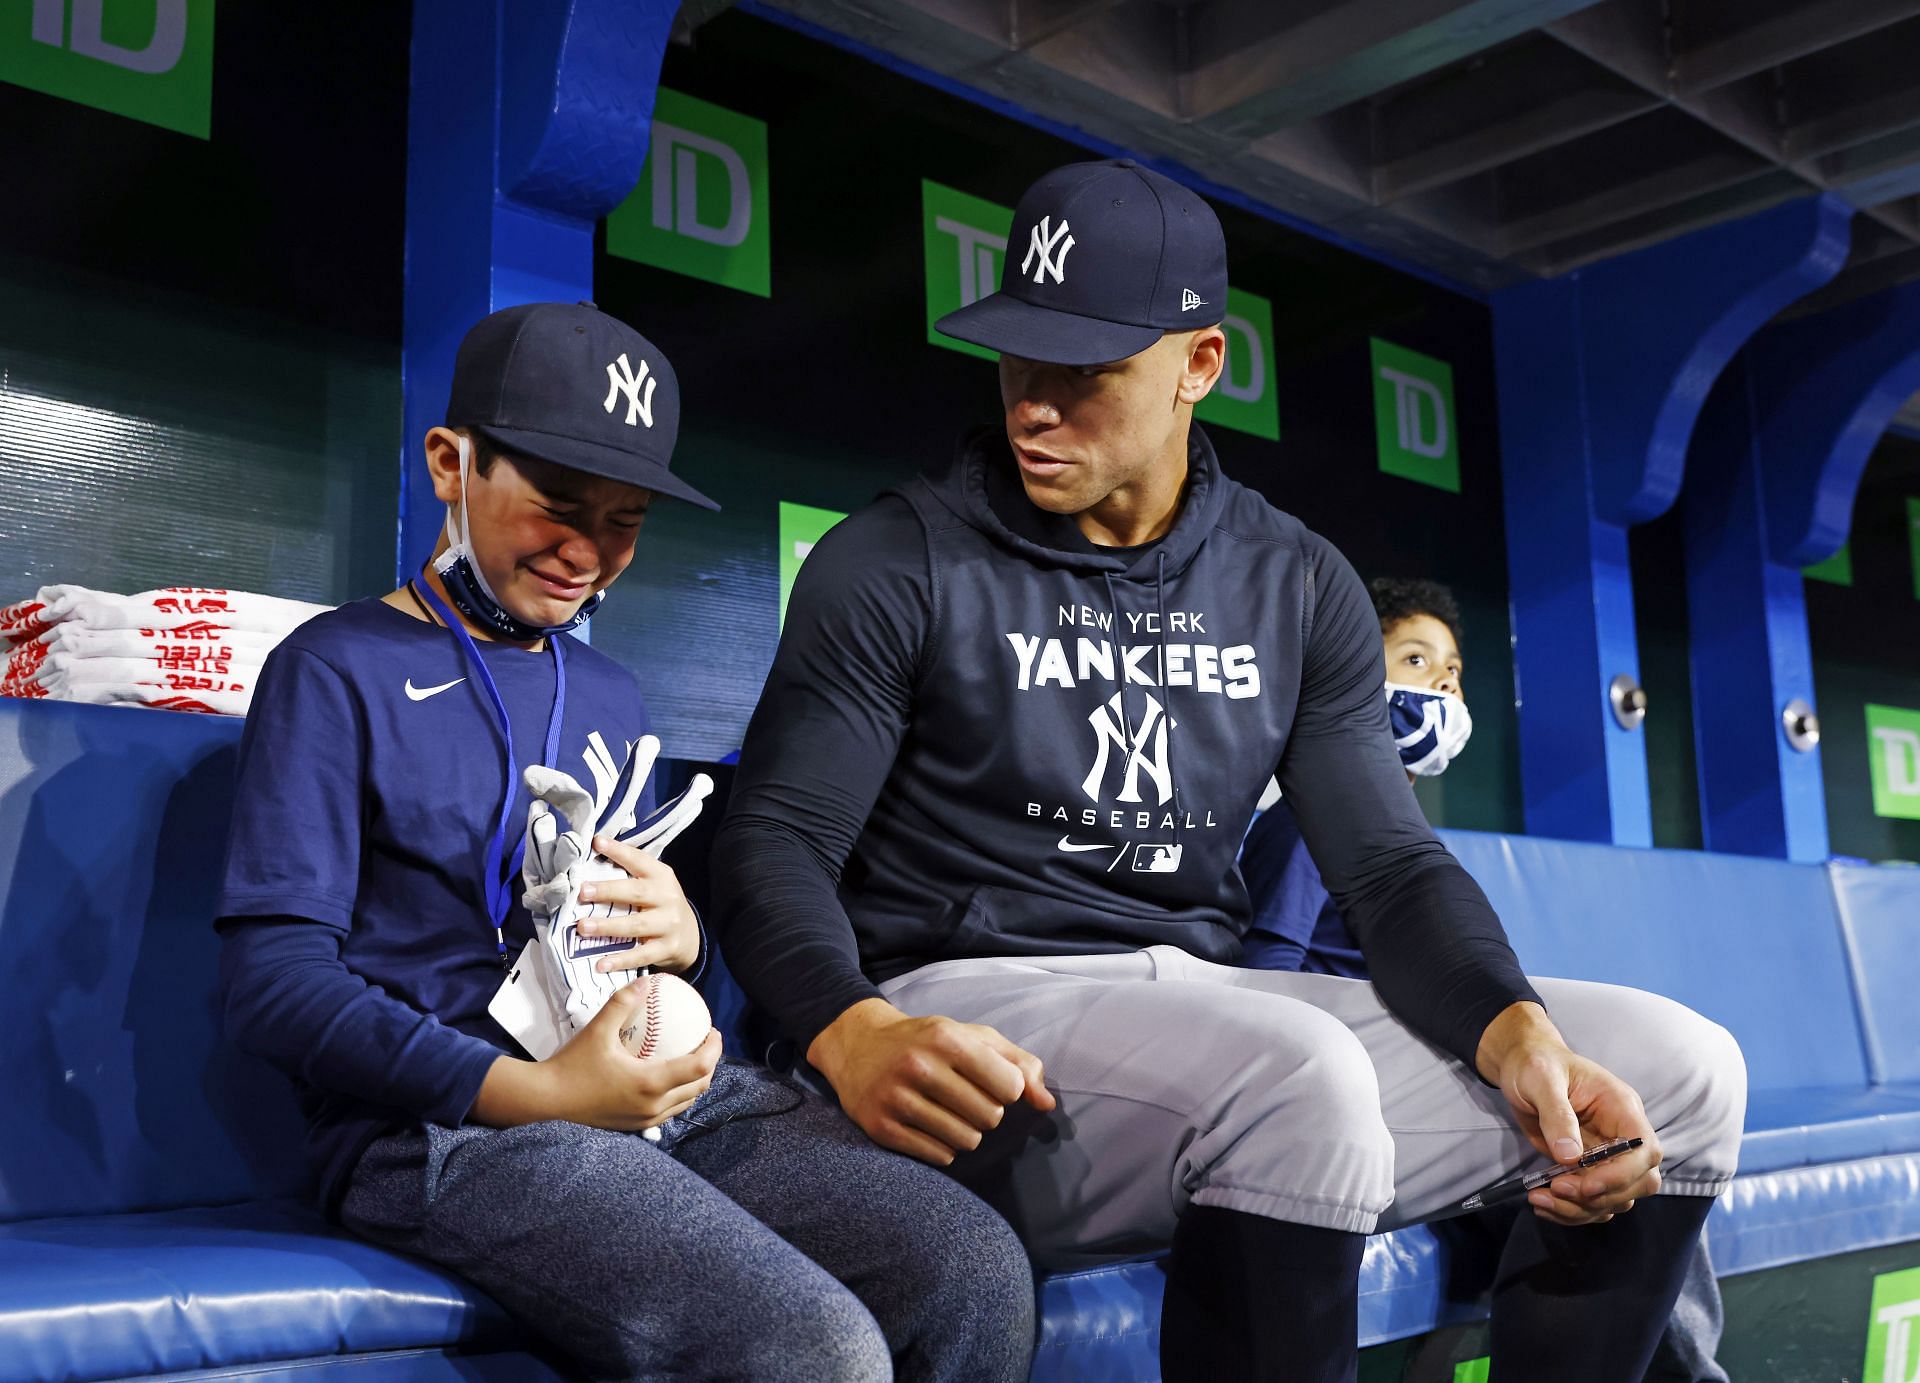 Brian Roberts and the New York Yankees, made for each other